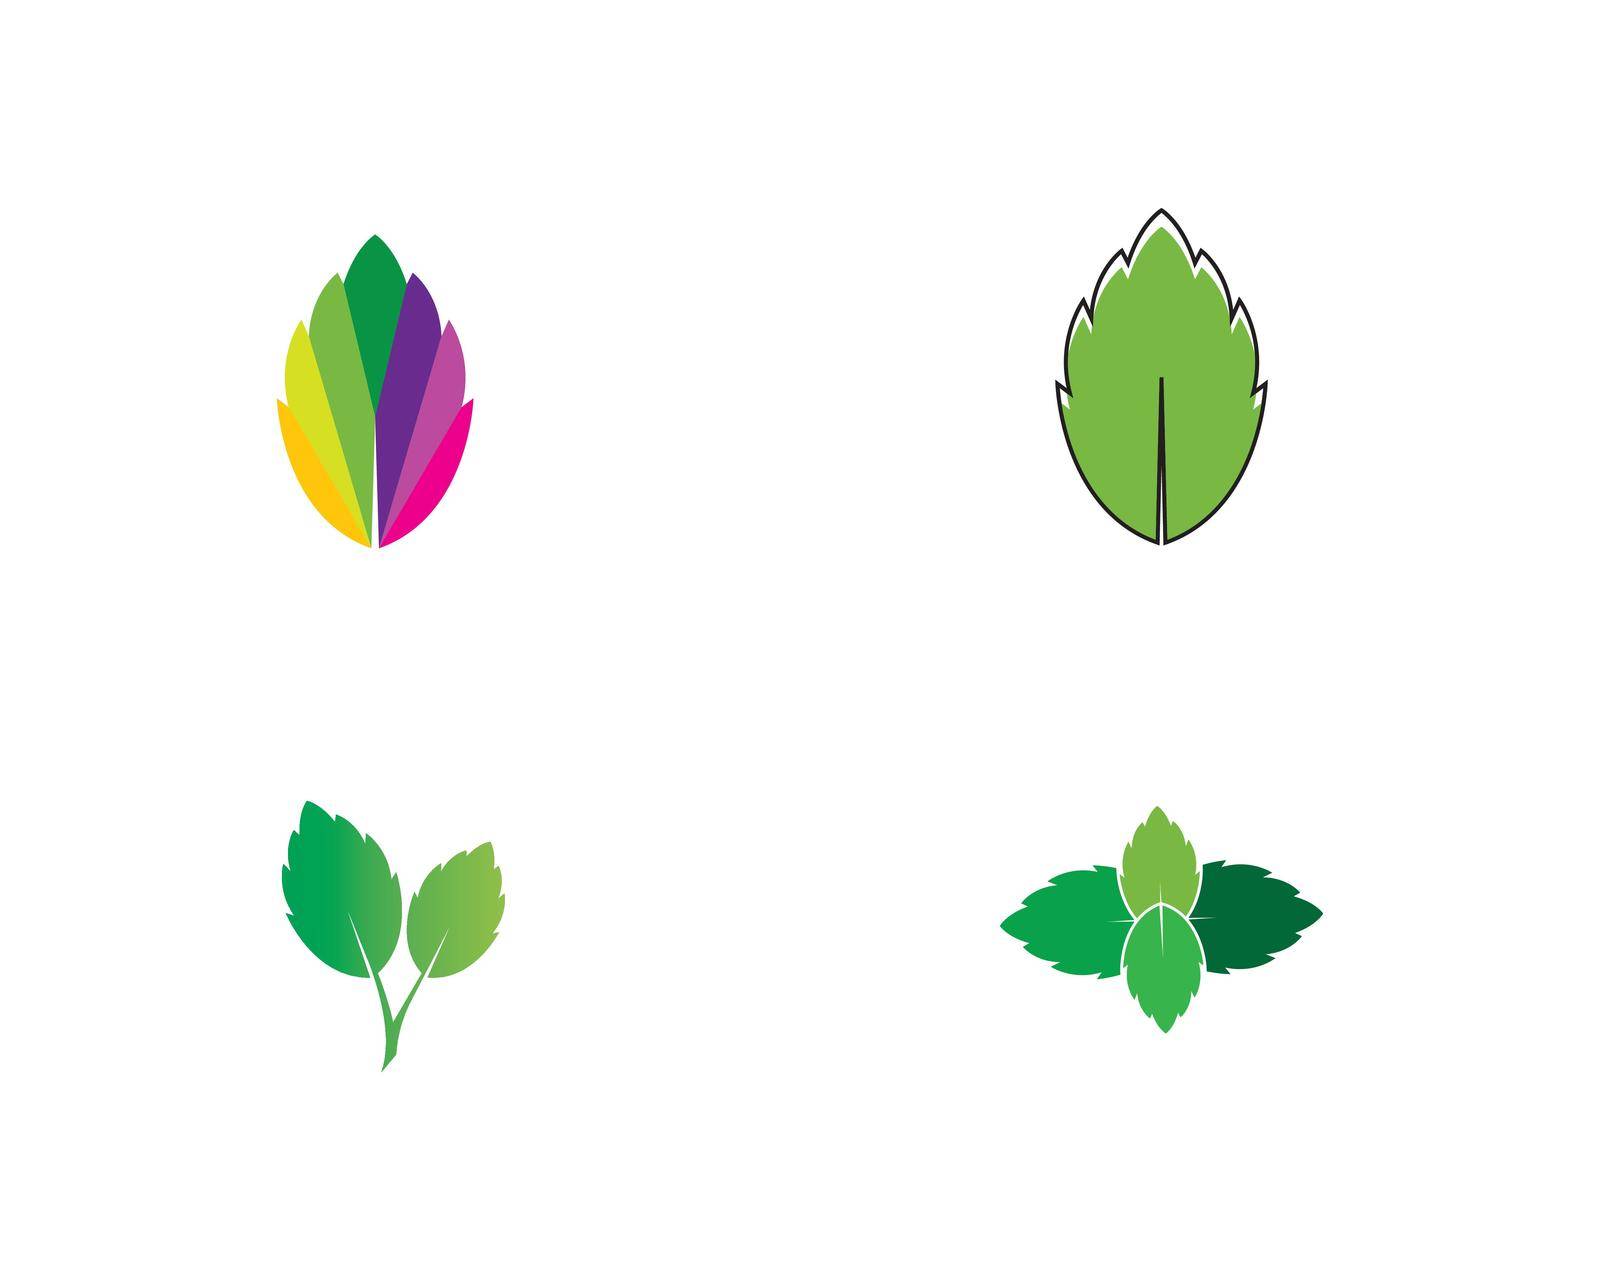 papermint leaf illustration vector by idan